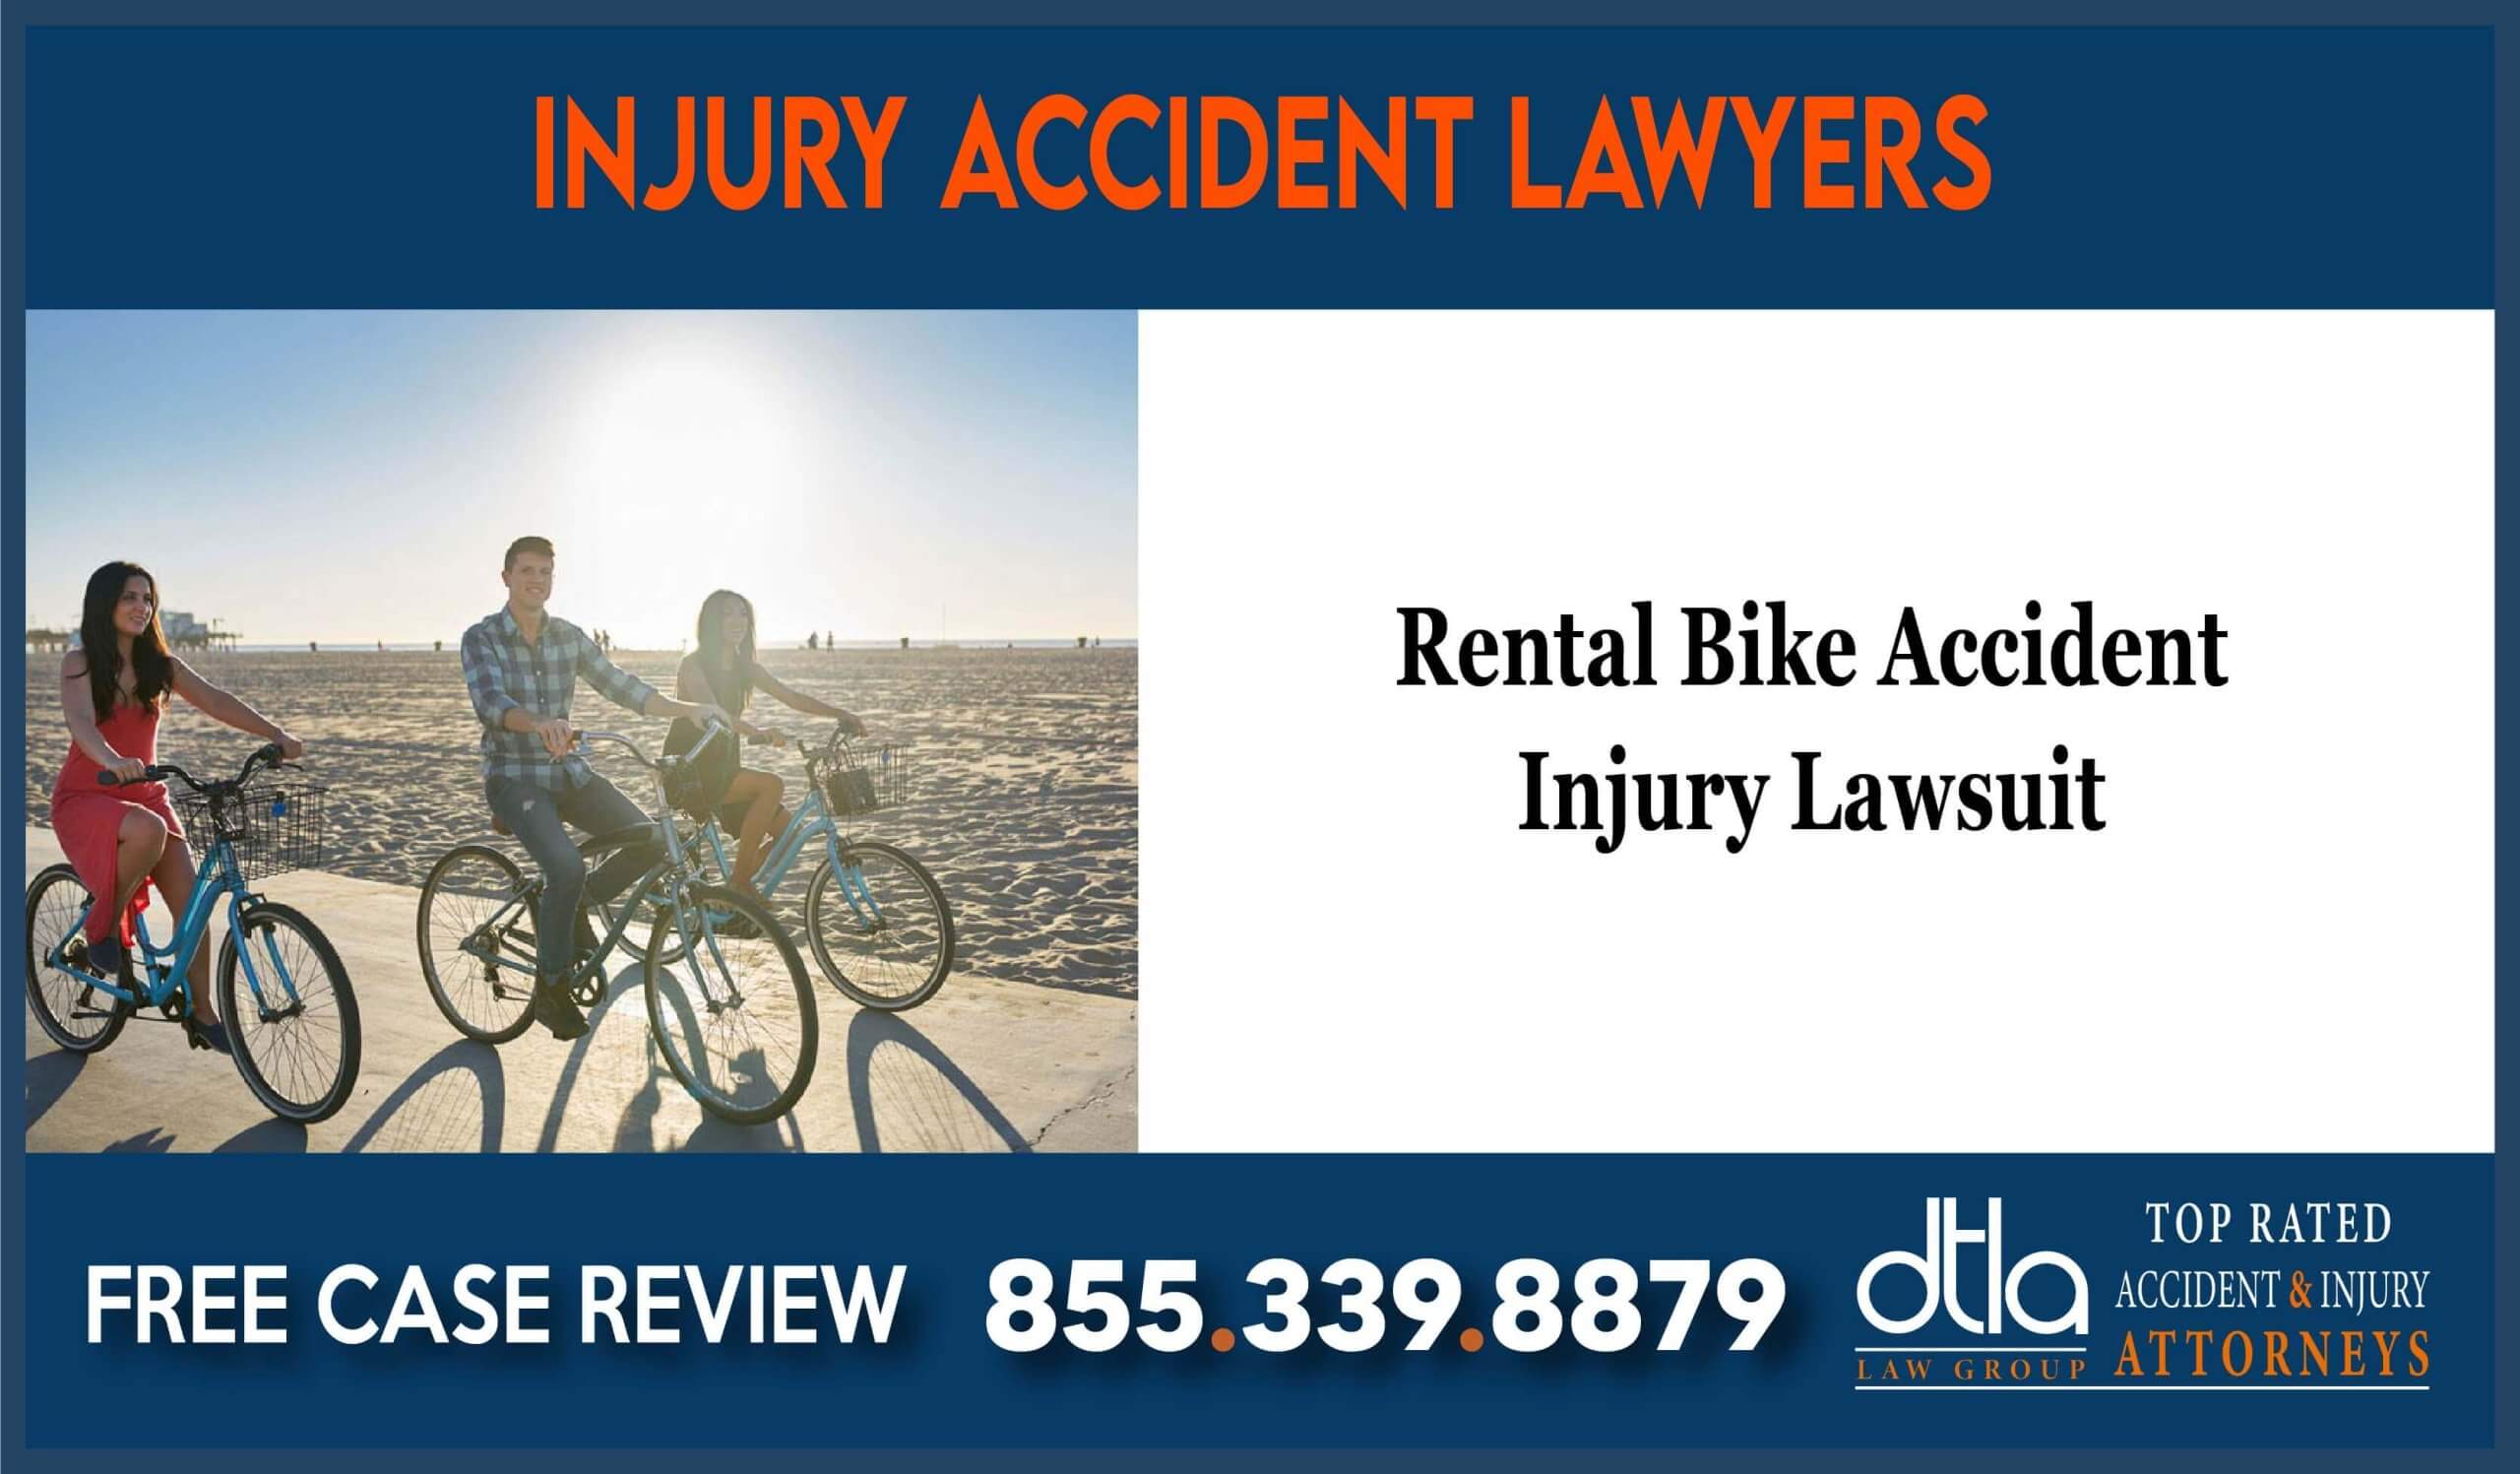 Rental Bike Accident Injury Lawsuit liability sue incident attorney